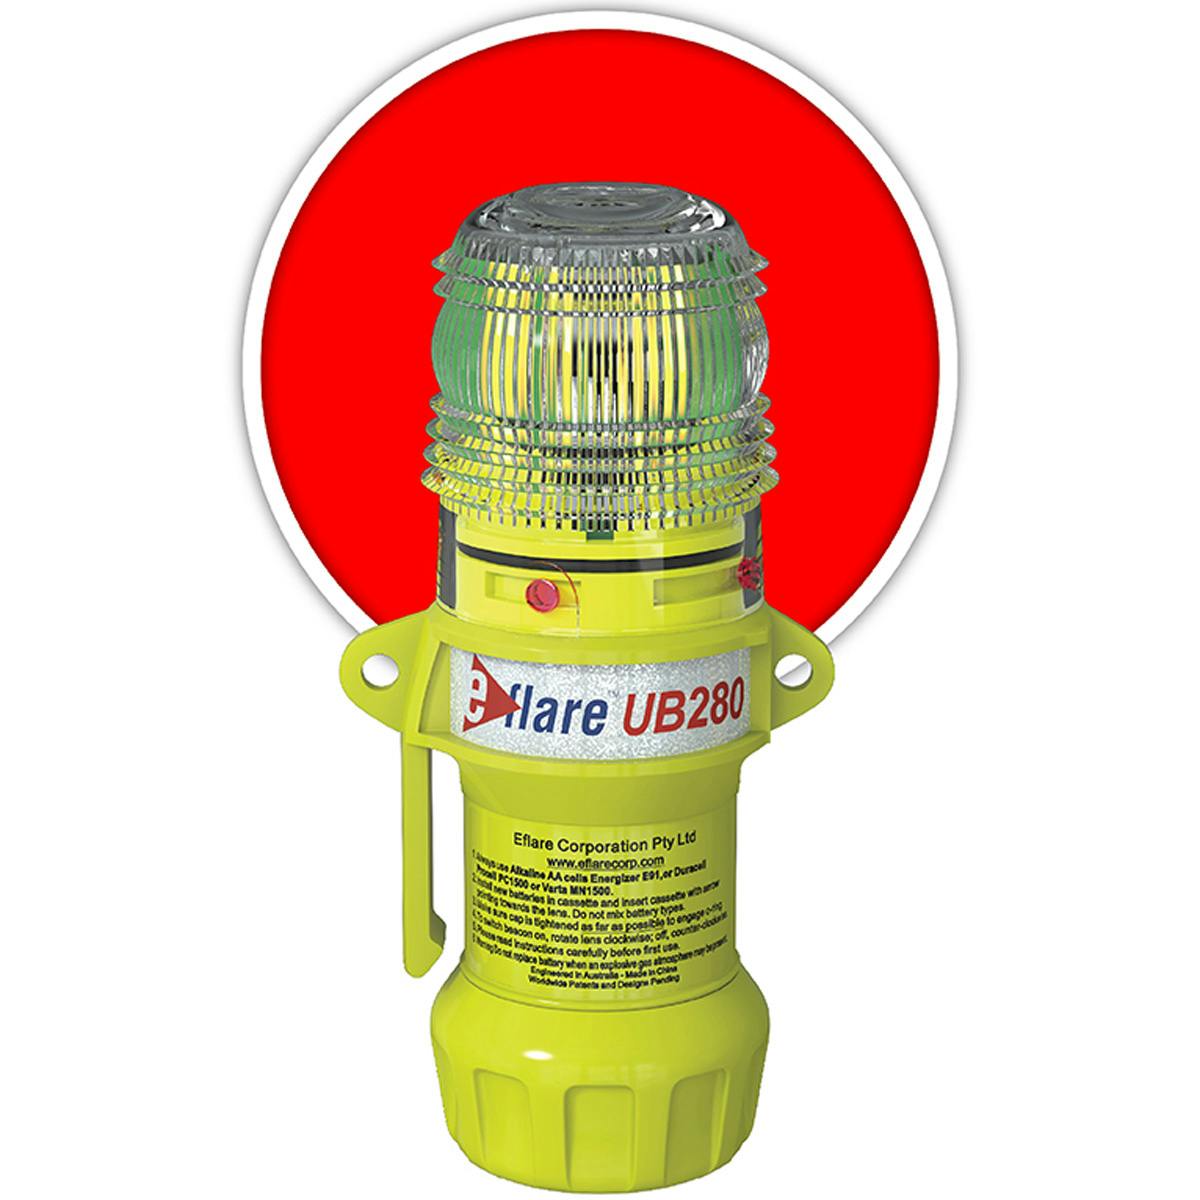 6" Safety & Emergency Beacon - Flashing / Steady-On Red, Red (939-UB280-R) - 6